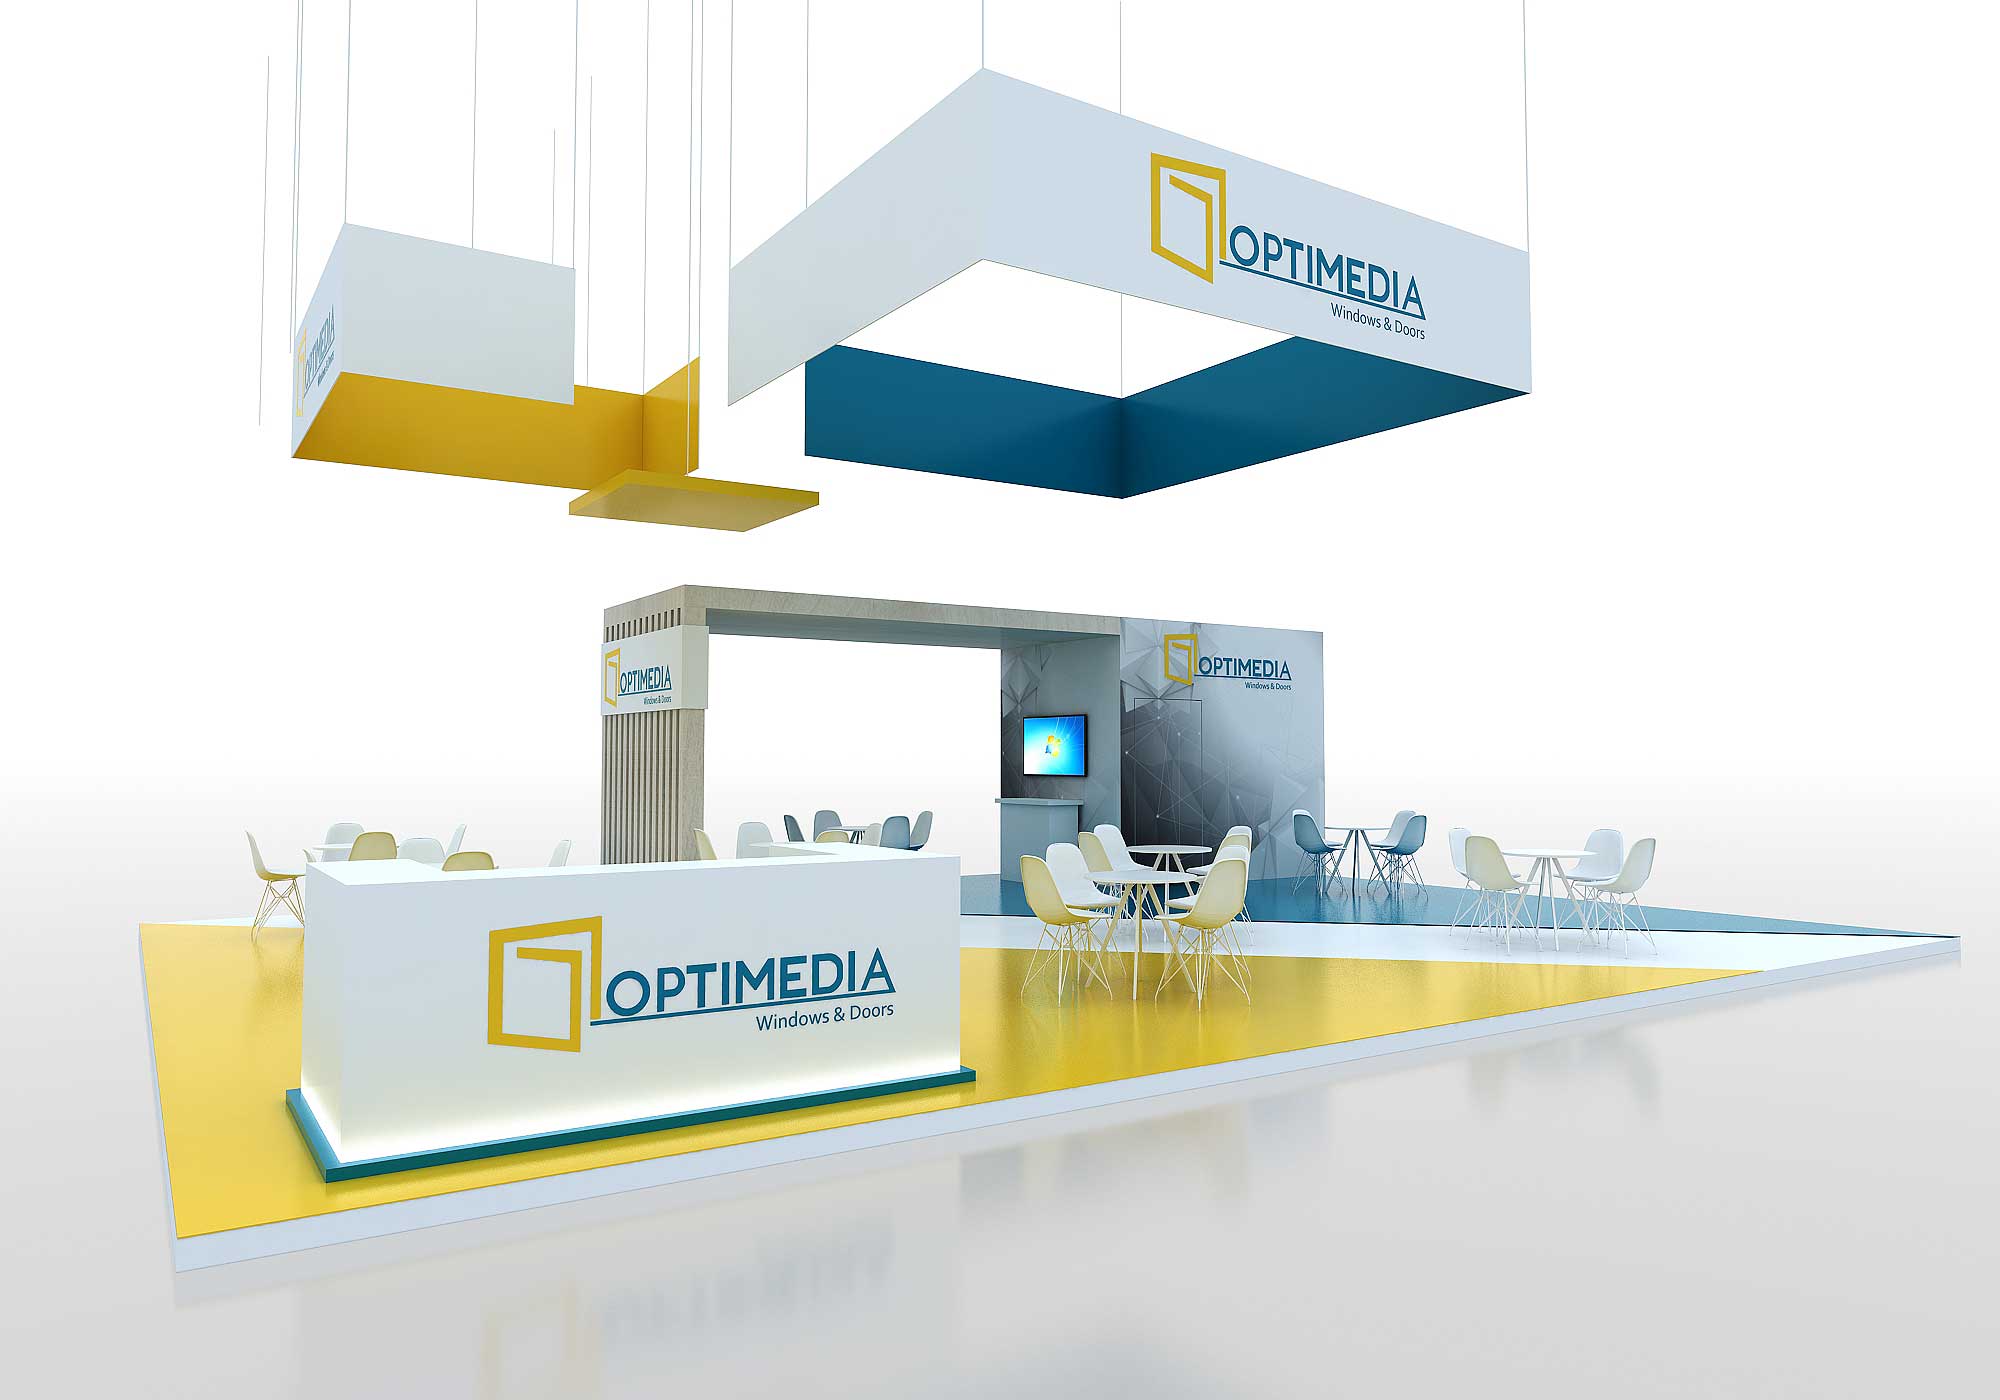 Exhibition booth contractor in Madrid